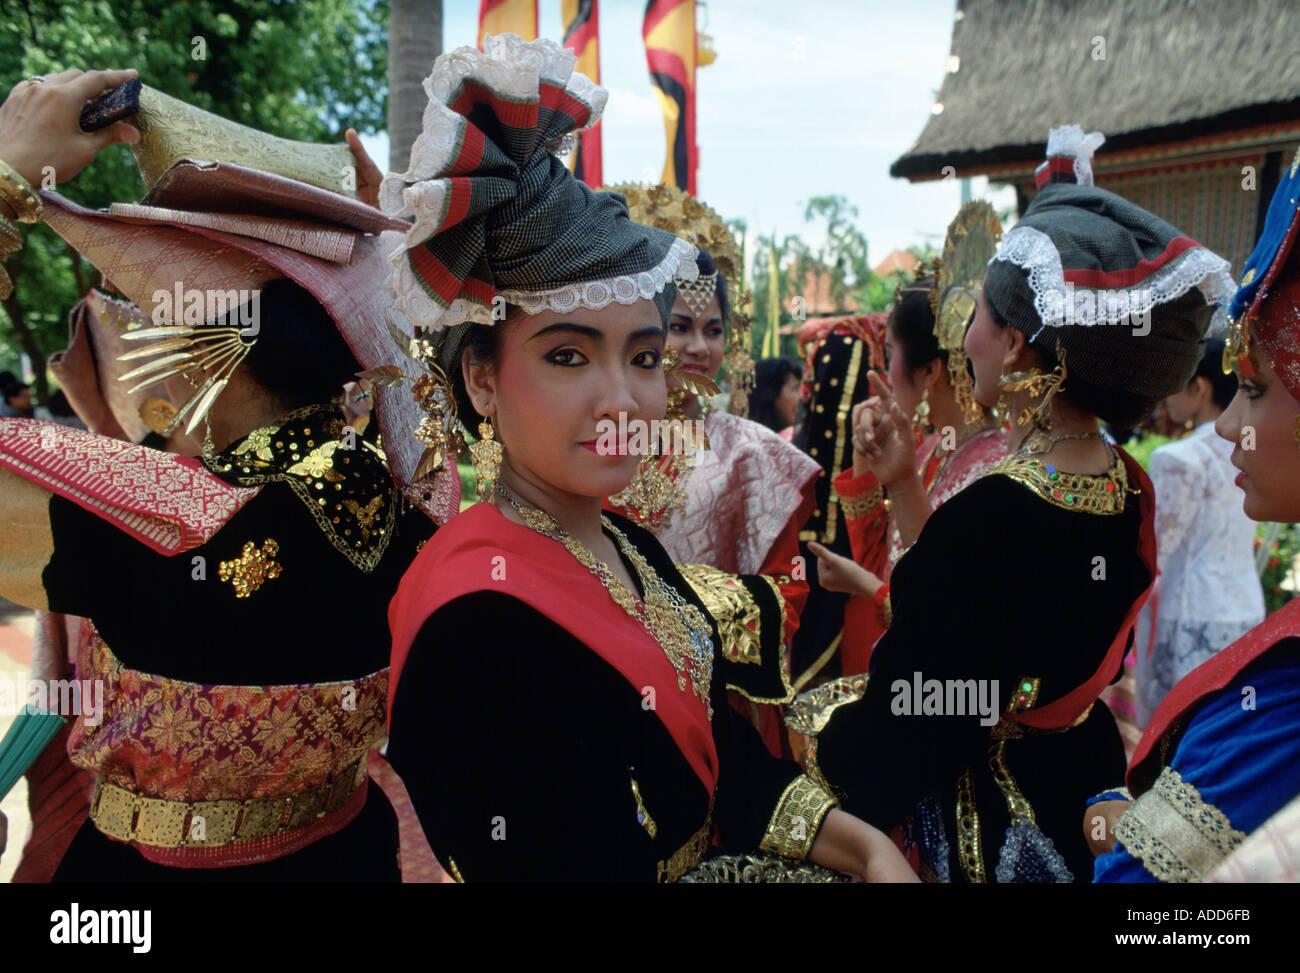 Dancers in national dress in Indonesia Stock Photo